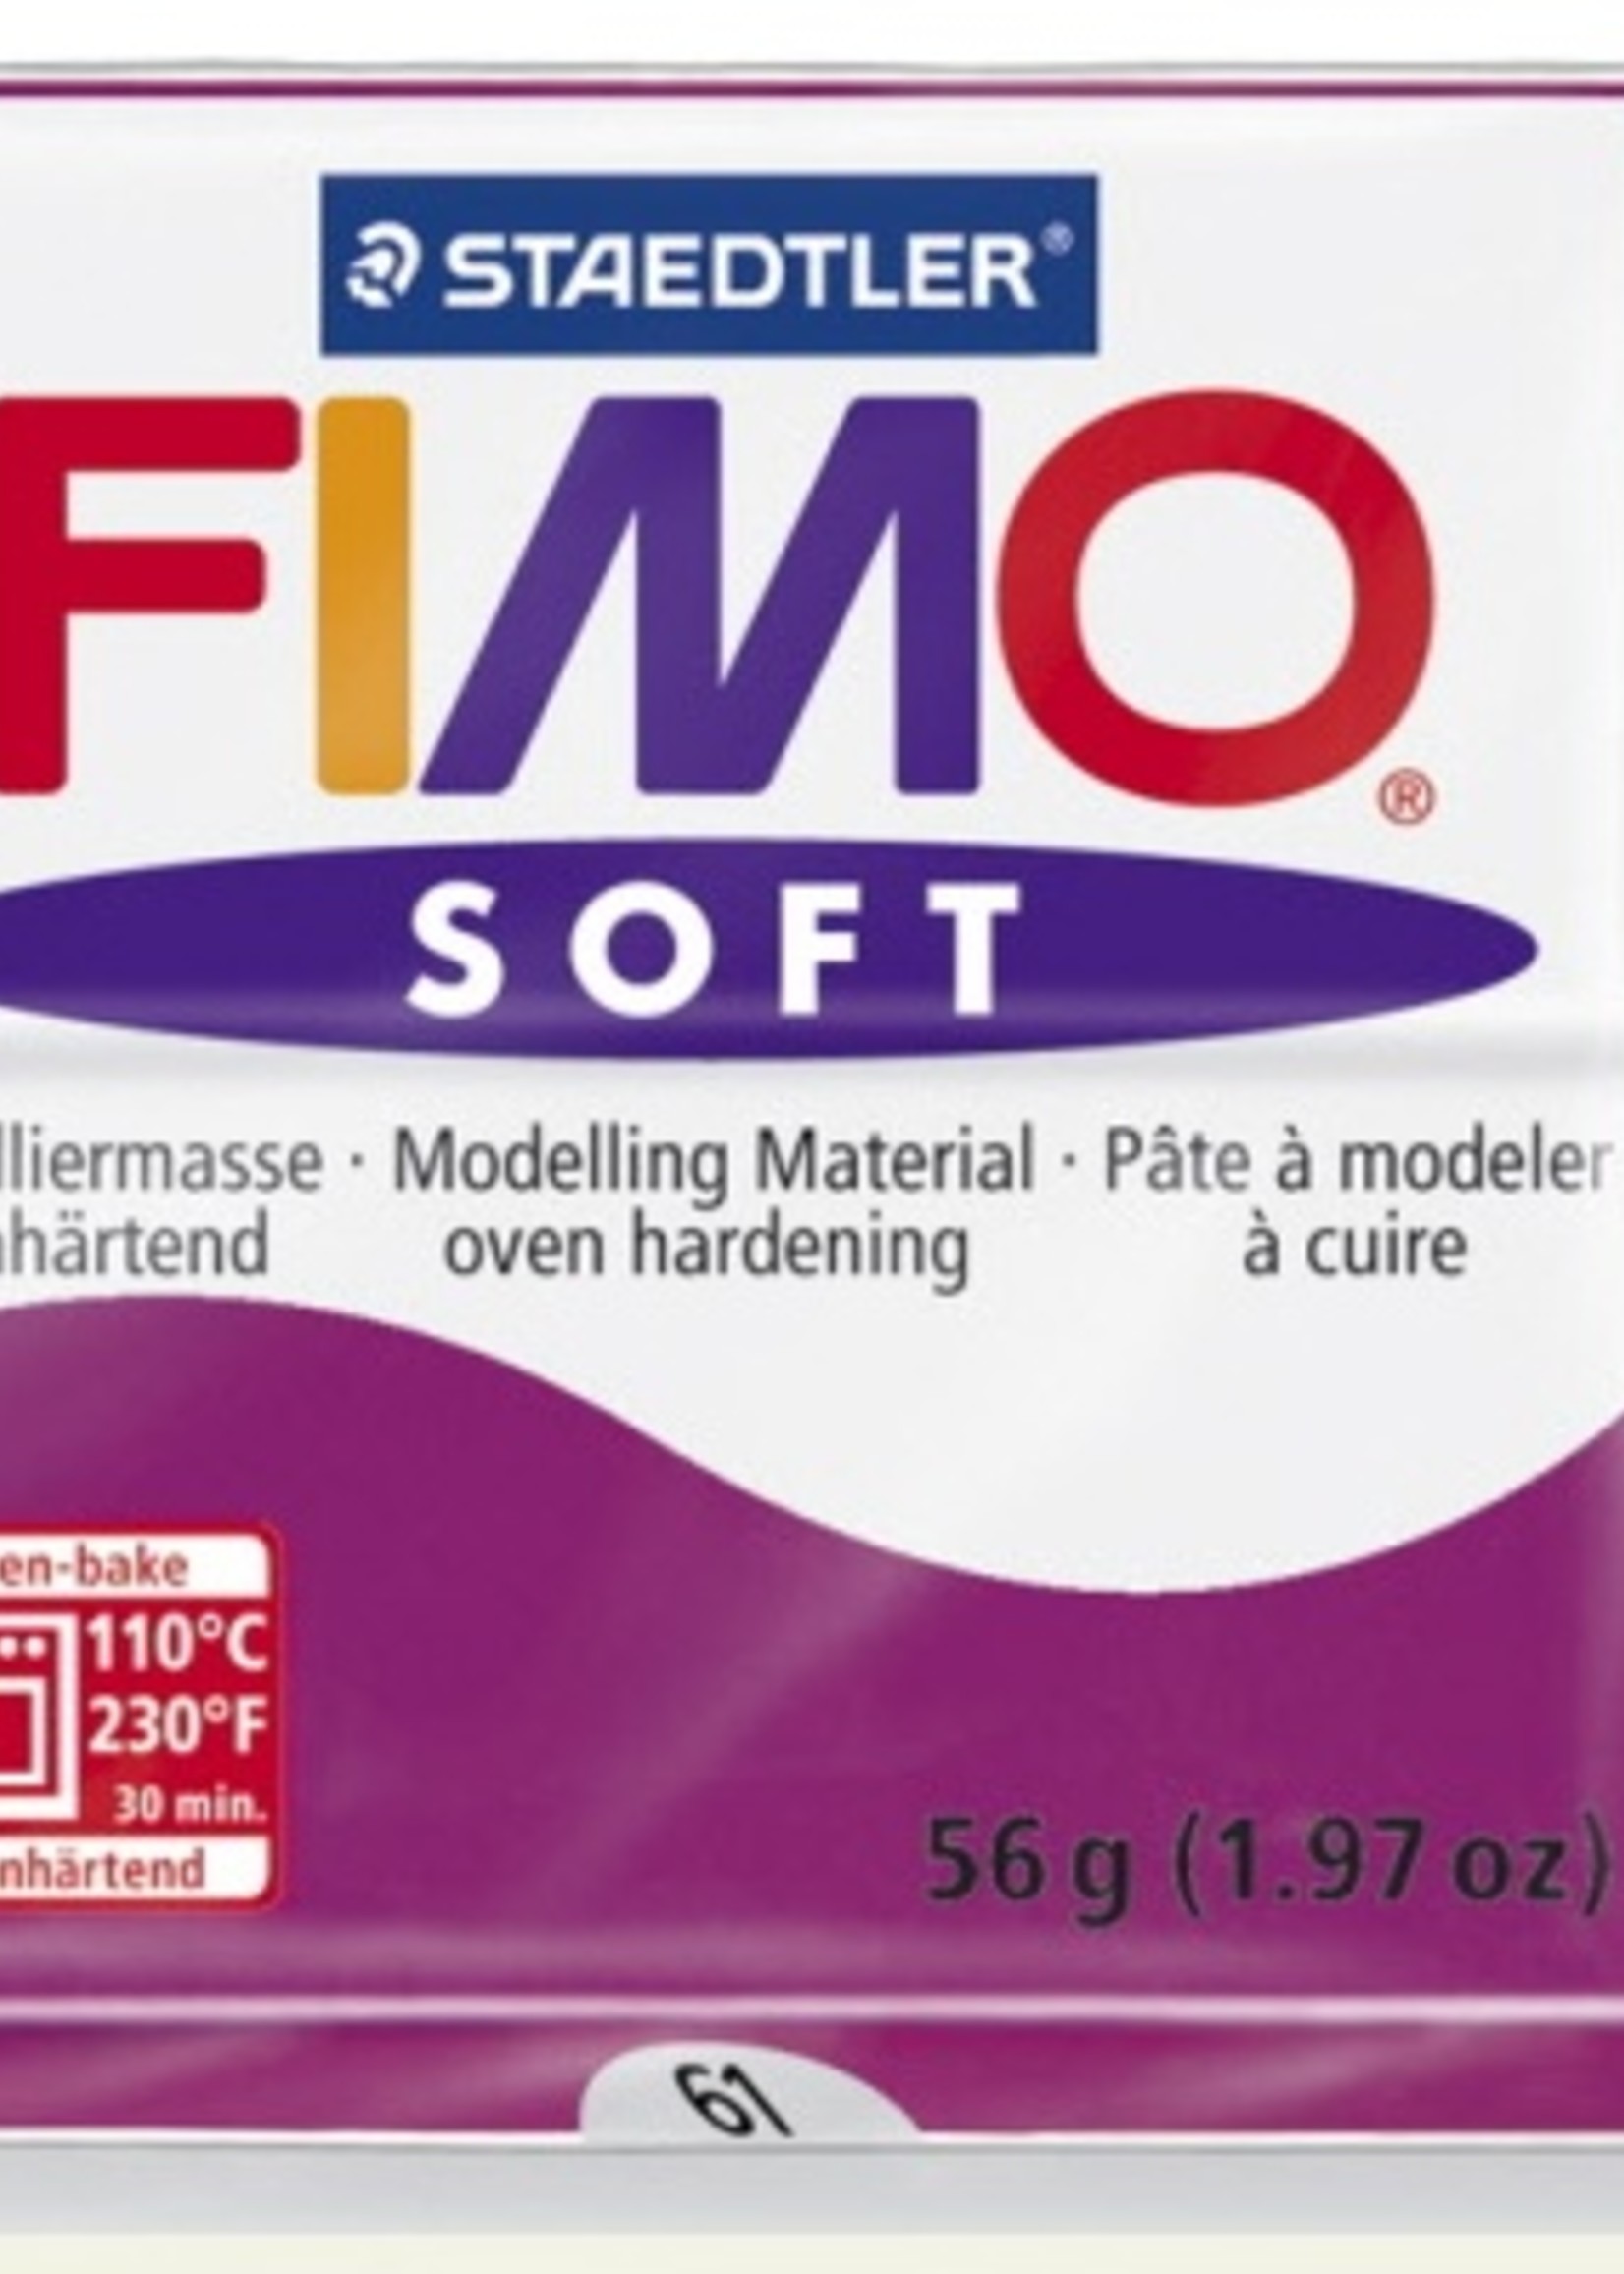 STAEDTLER FIMO SOFT OVEN BAKE CLAY 61 PURPLE 57G